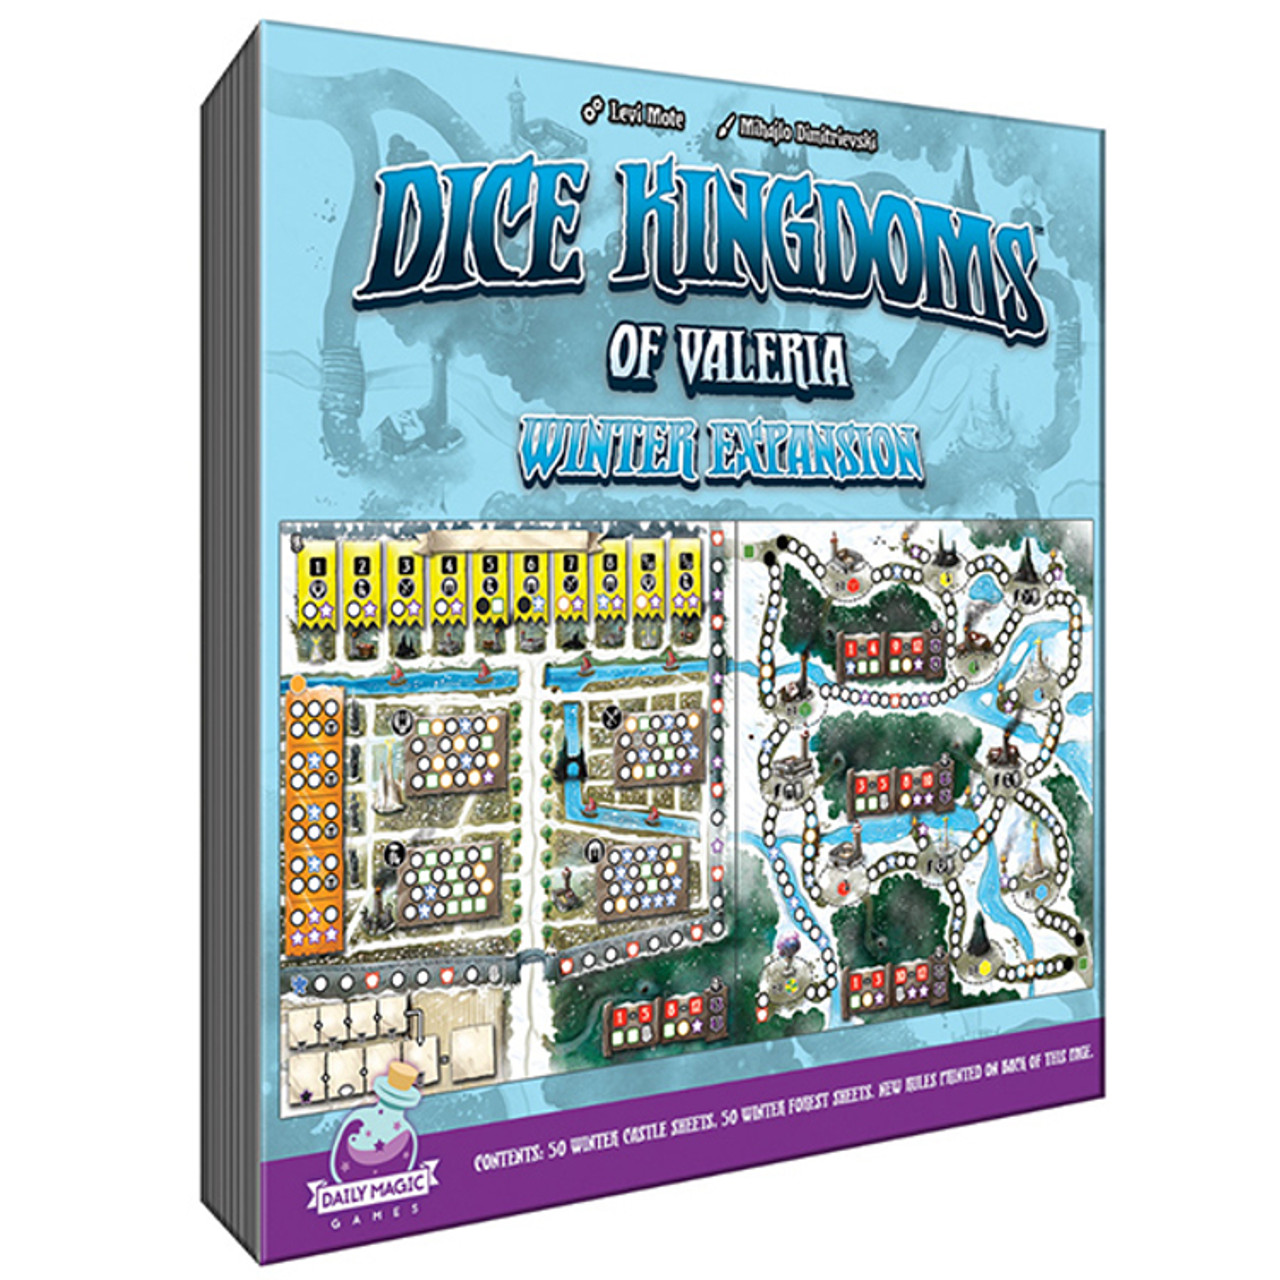 How long is Dice Kingdoms?